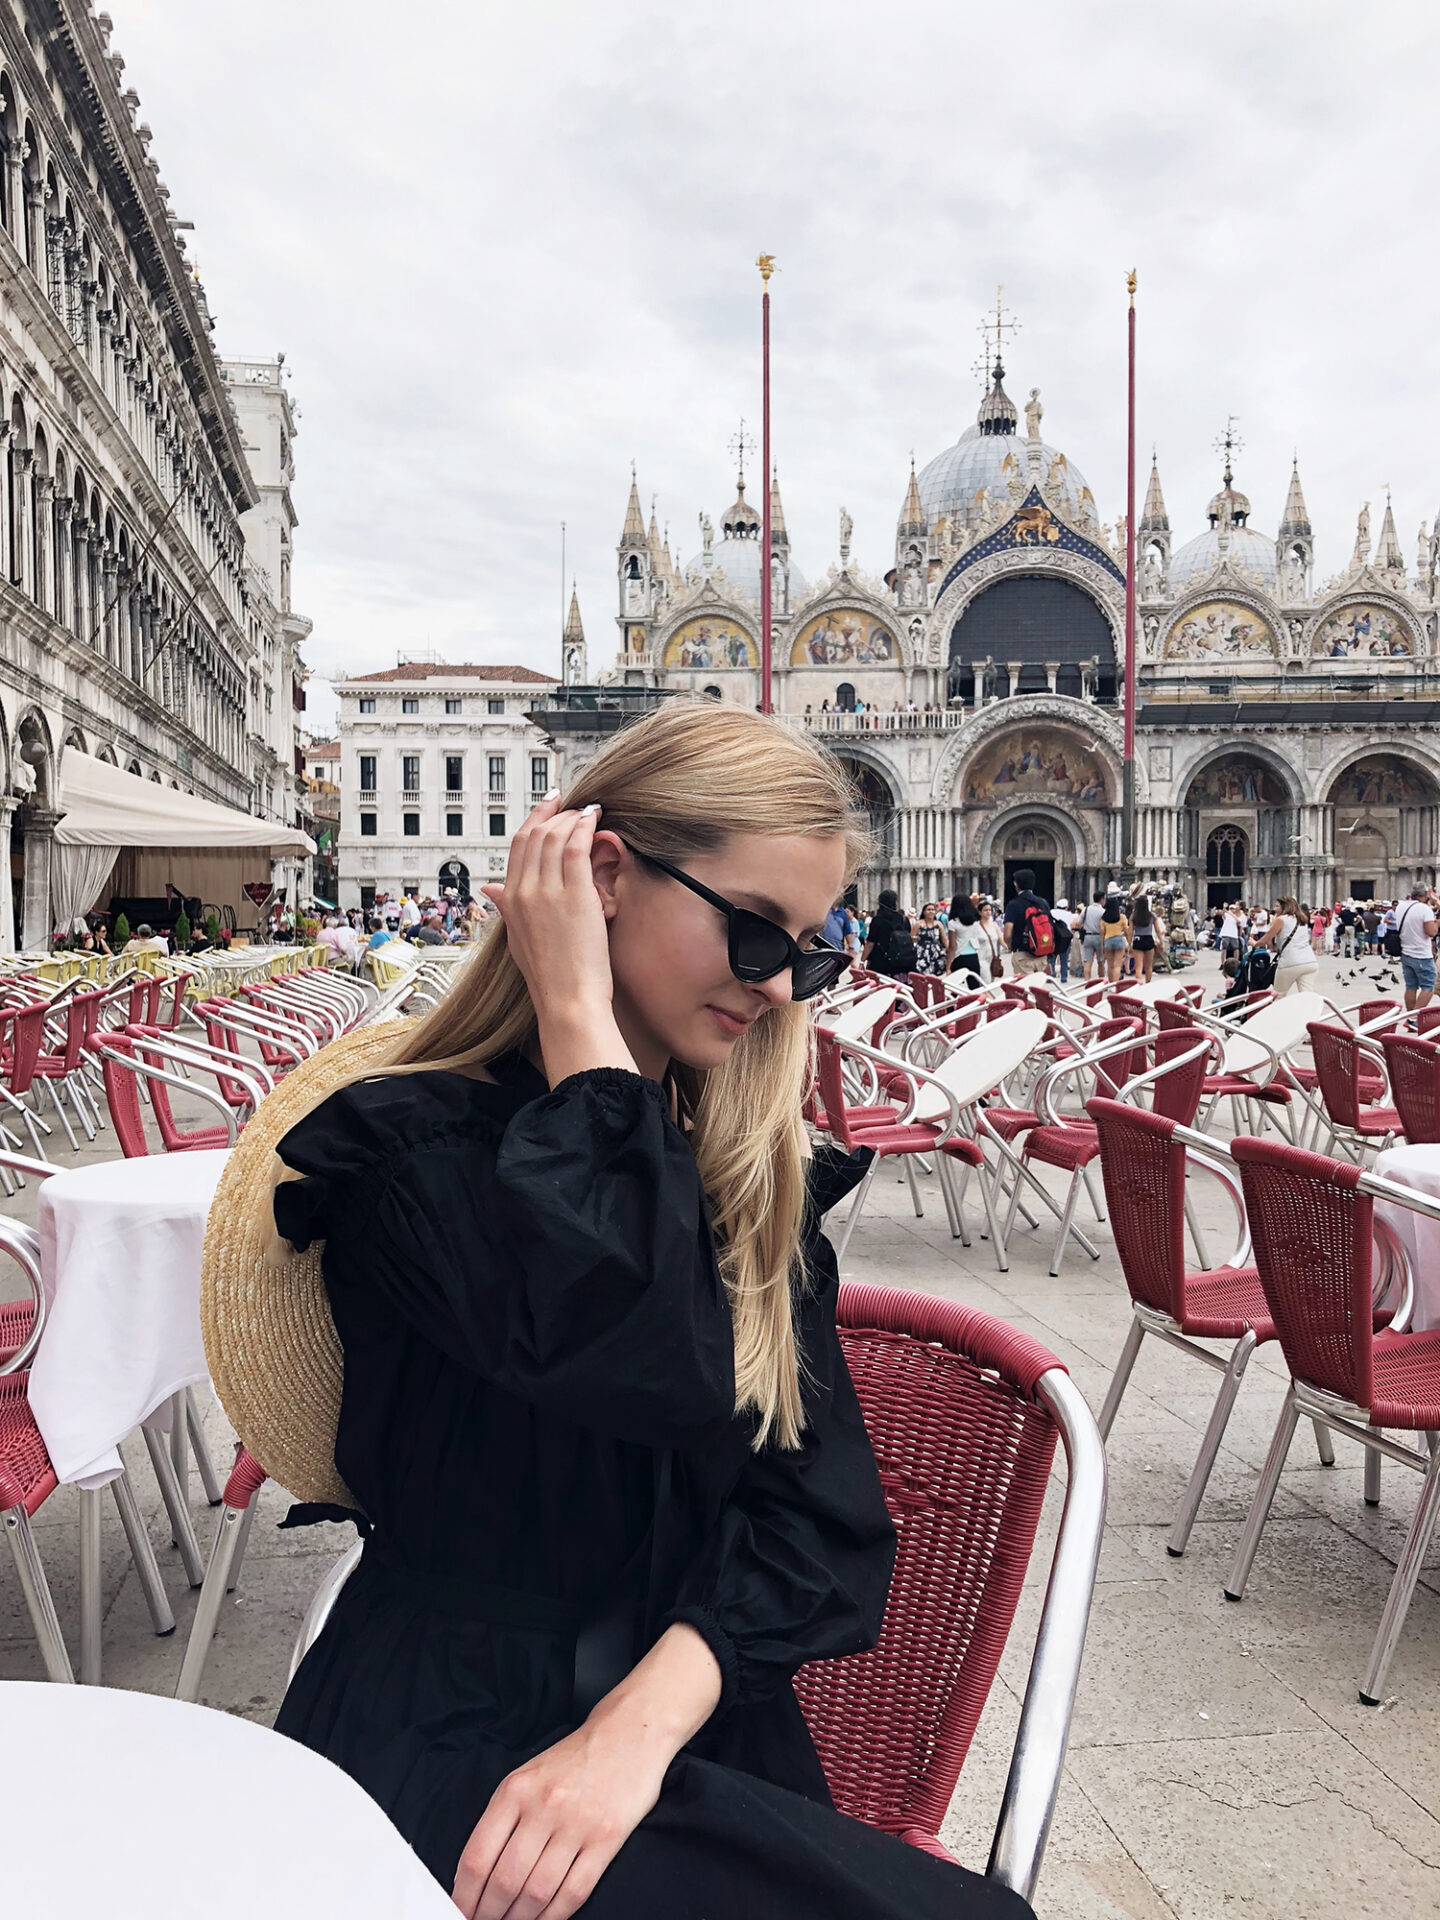 Girl in Venice at piazza san marco